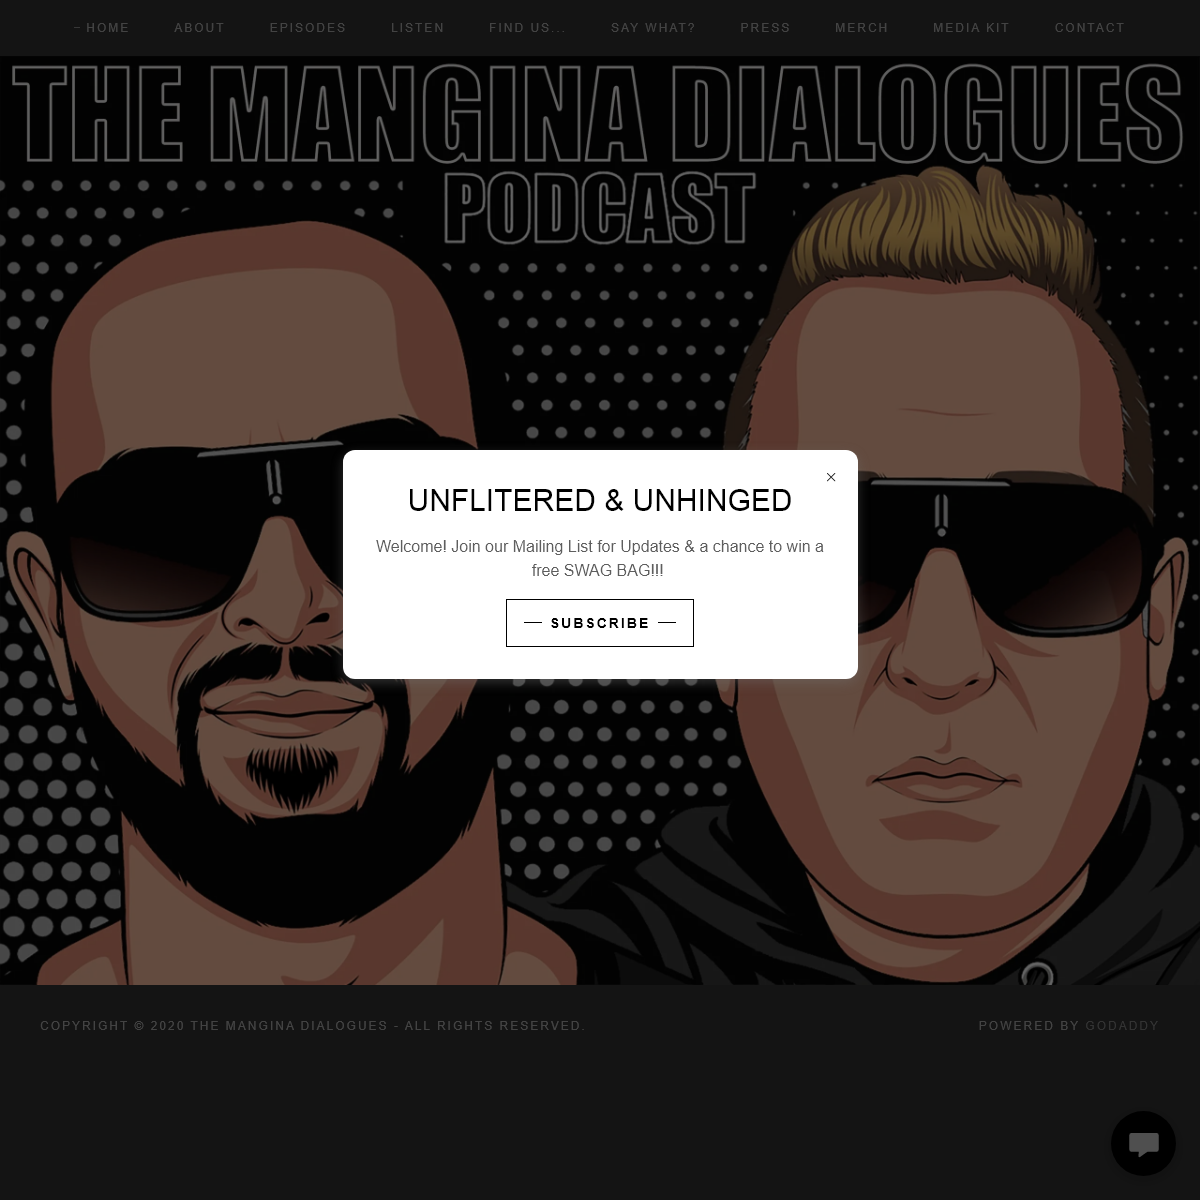 A complete backup of themanginadialogues.com